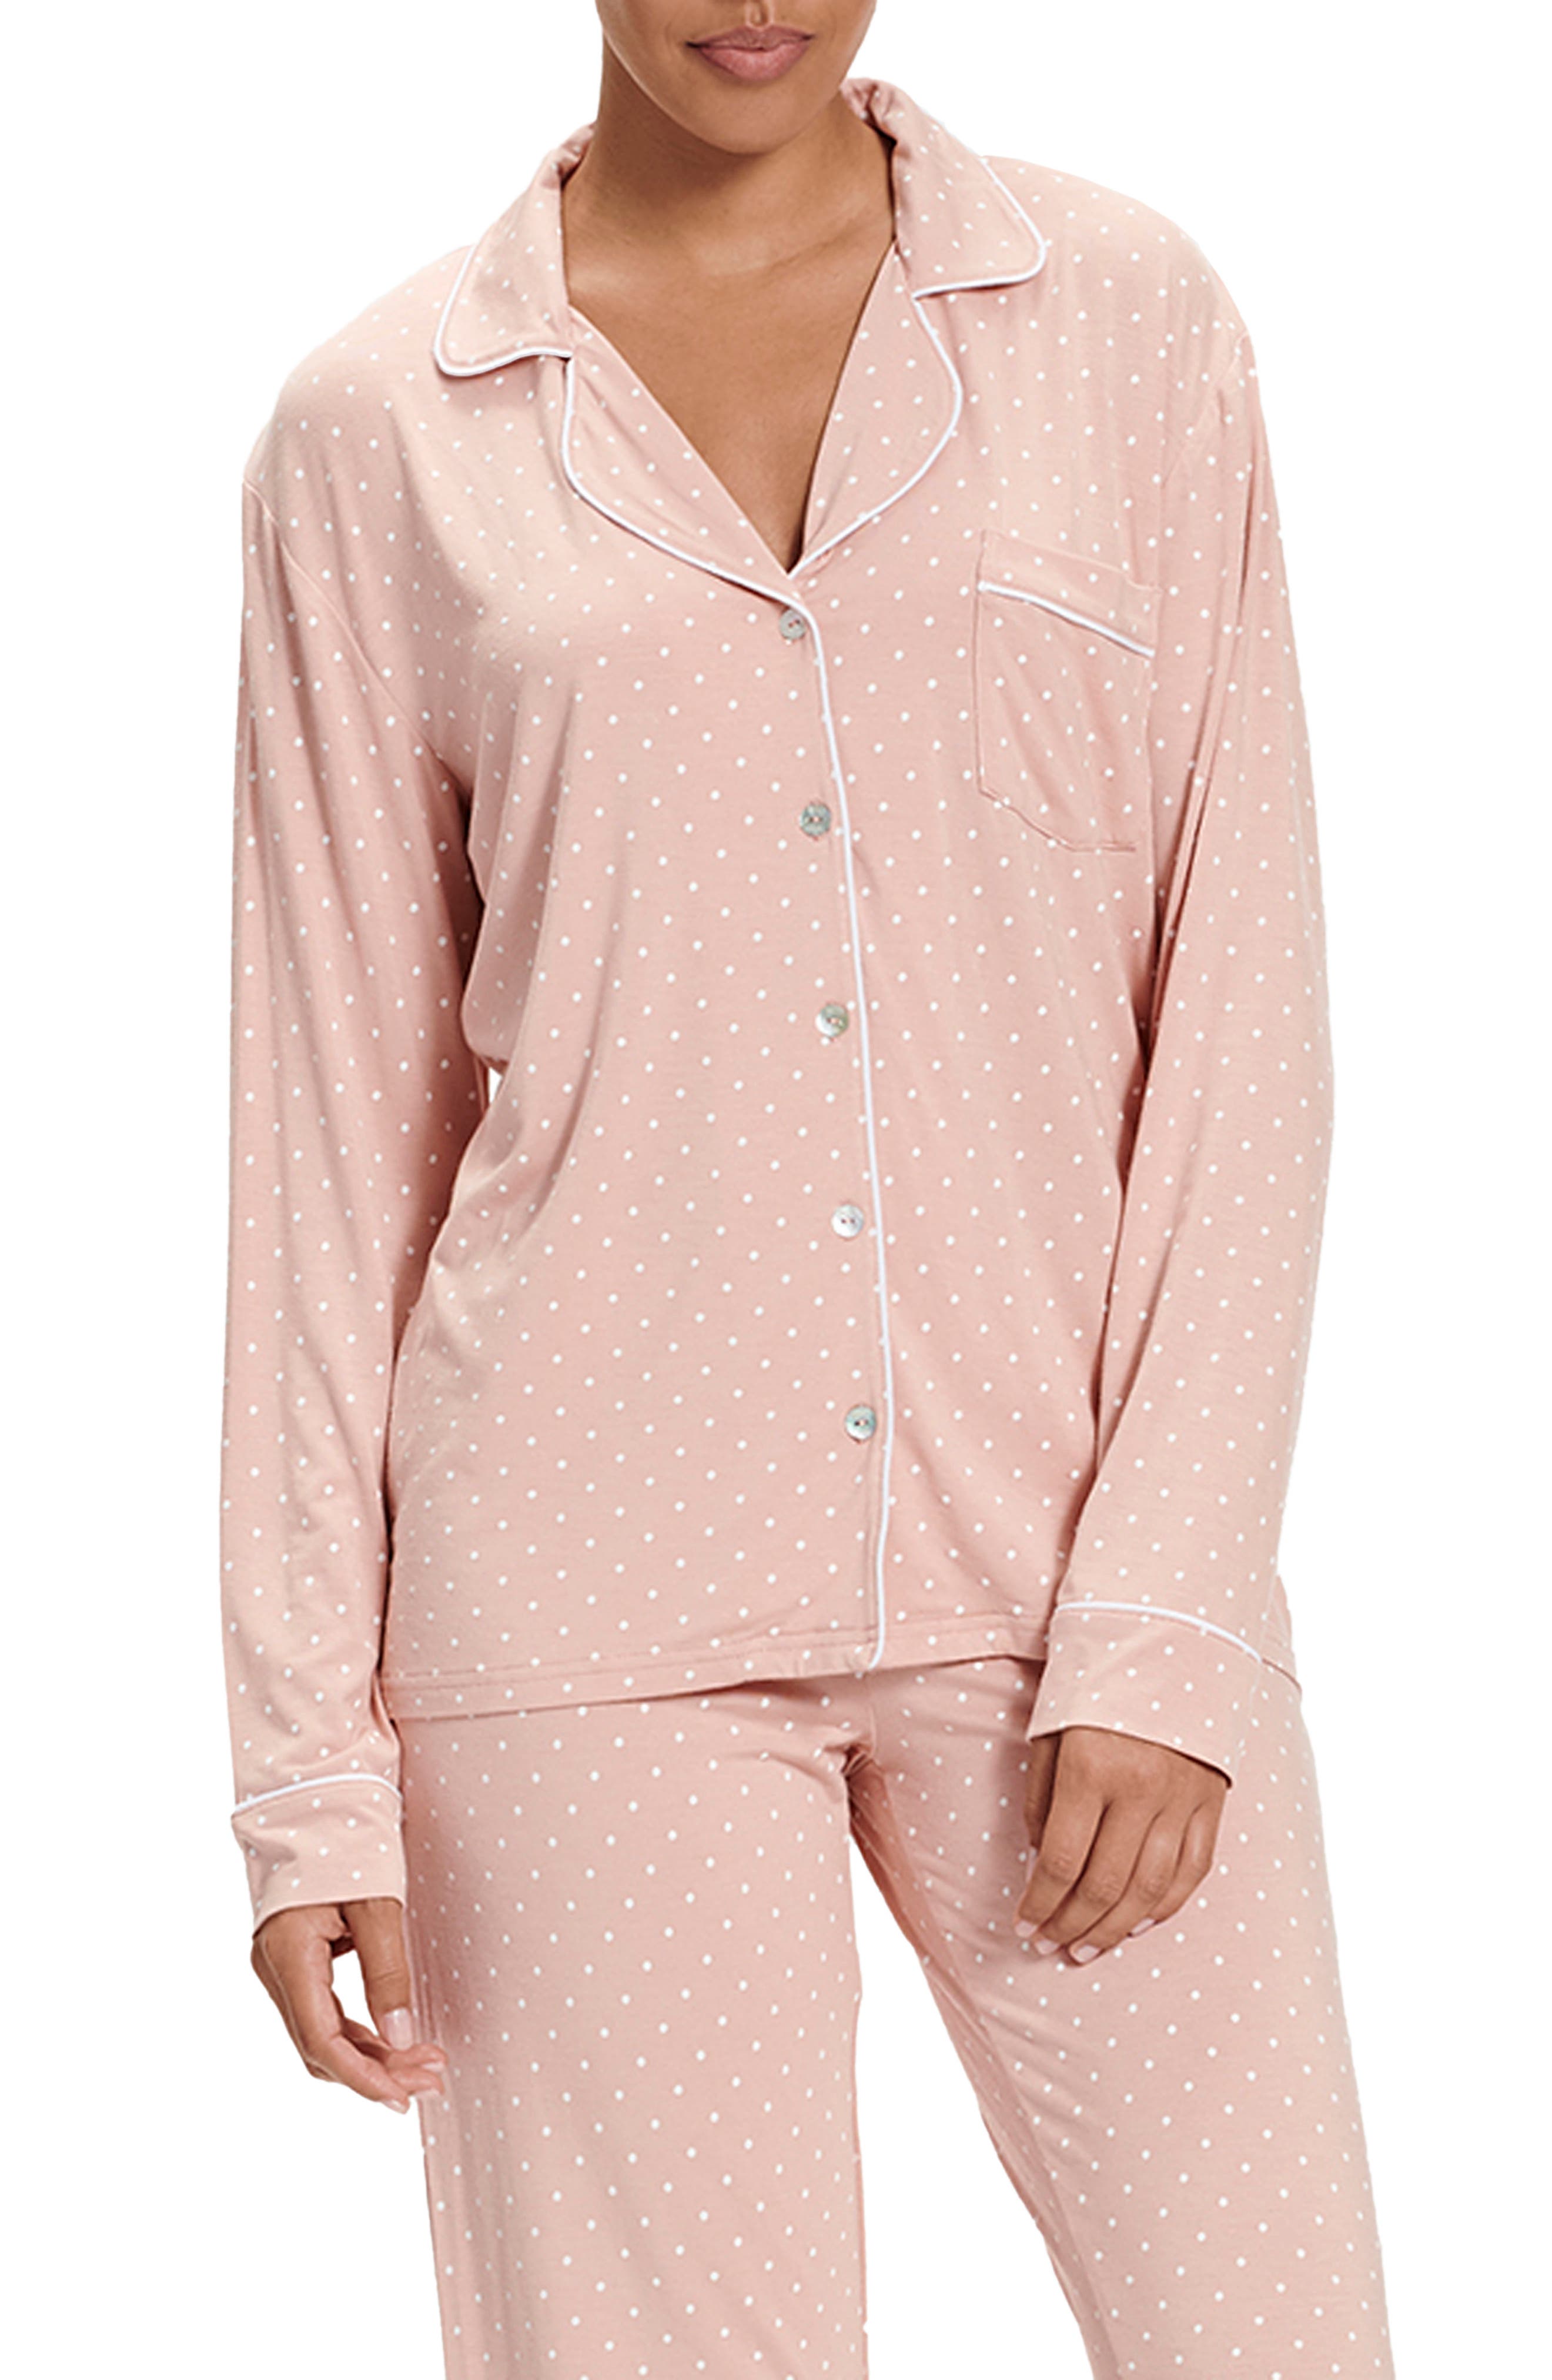 ugg nightgown